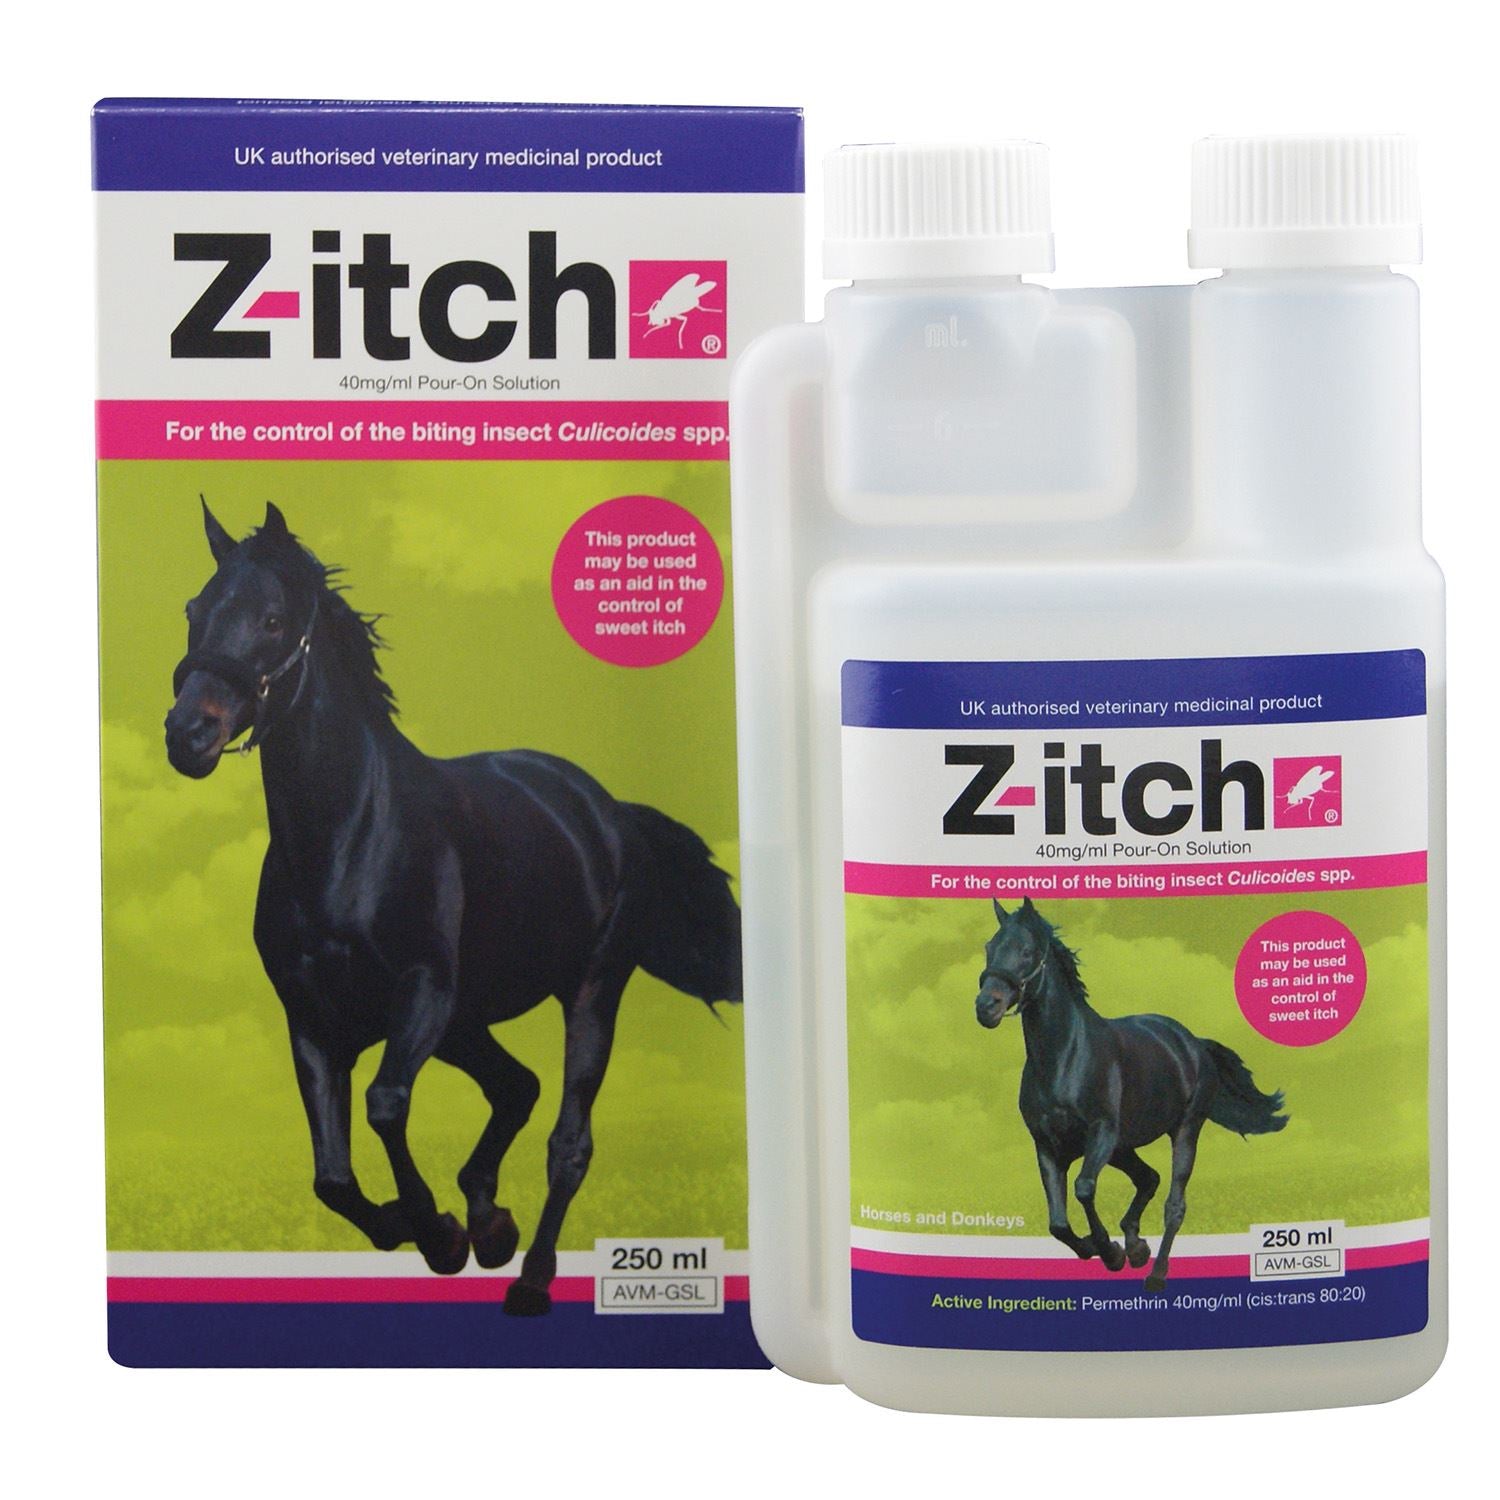 Z-Itch pour-on solution